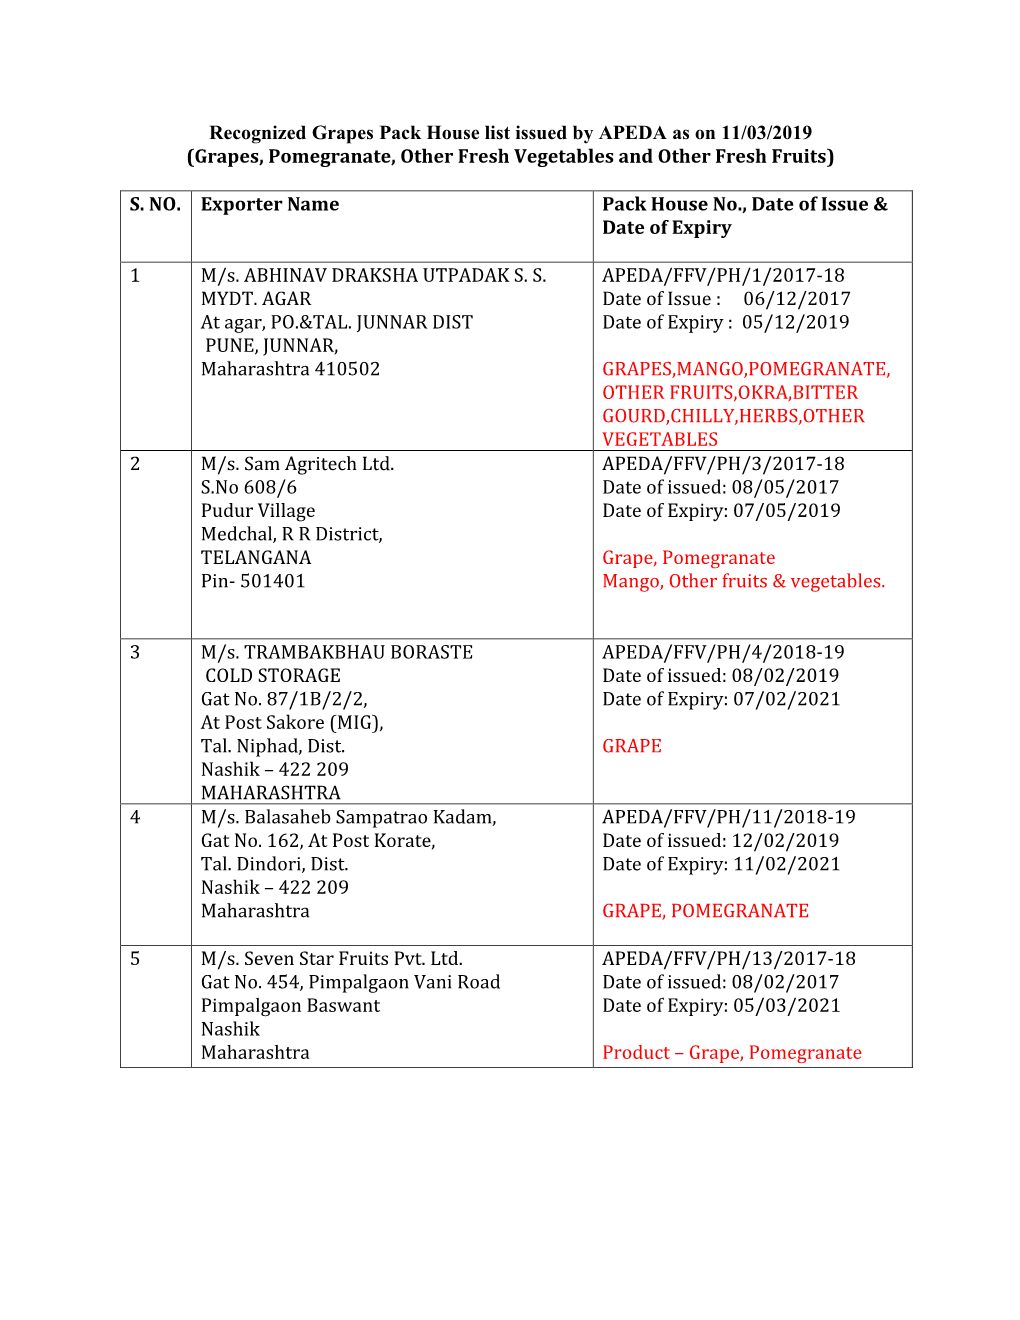 Recognized Grapes Pack House List Issued by APEDA As on 11/03/2019 (Grapes, Pomegranate, Other Fresh Vegetables and Other Fresh Fruits)